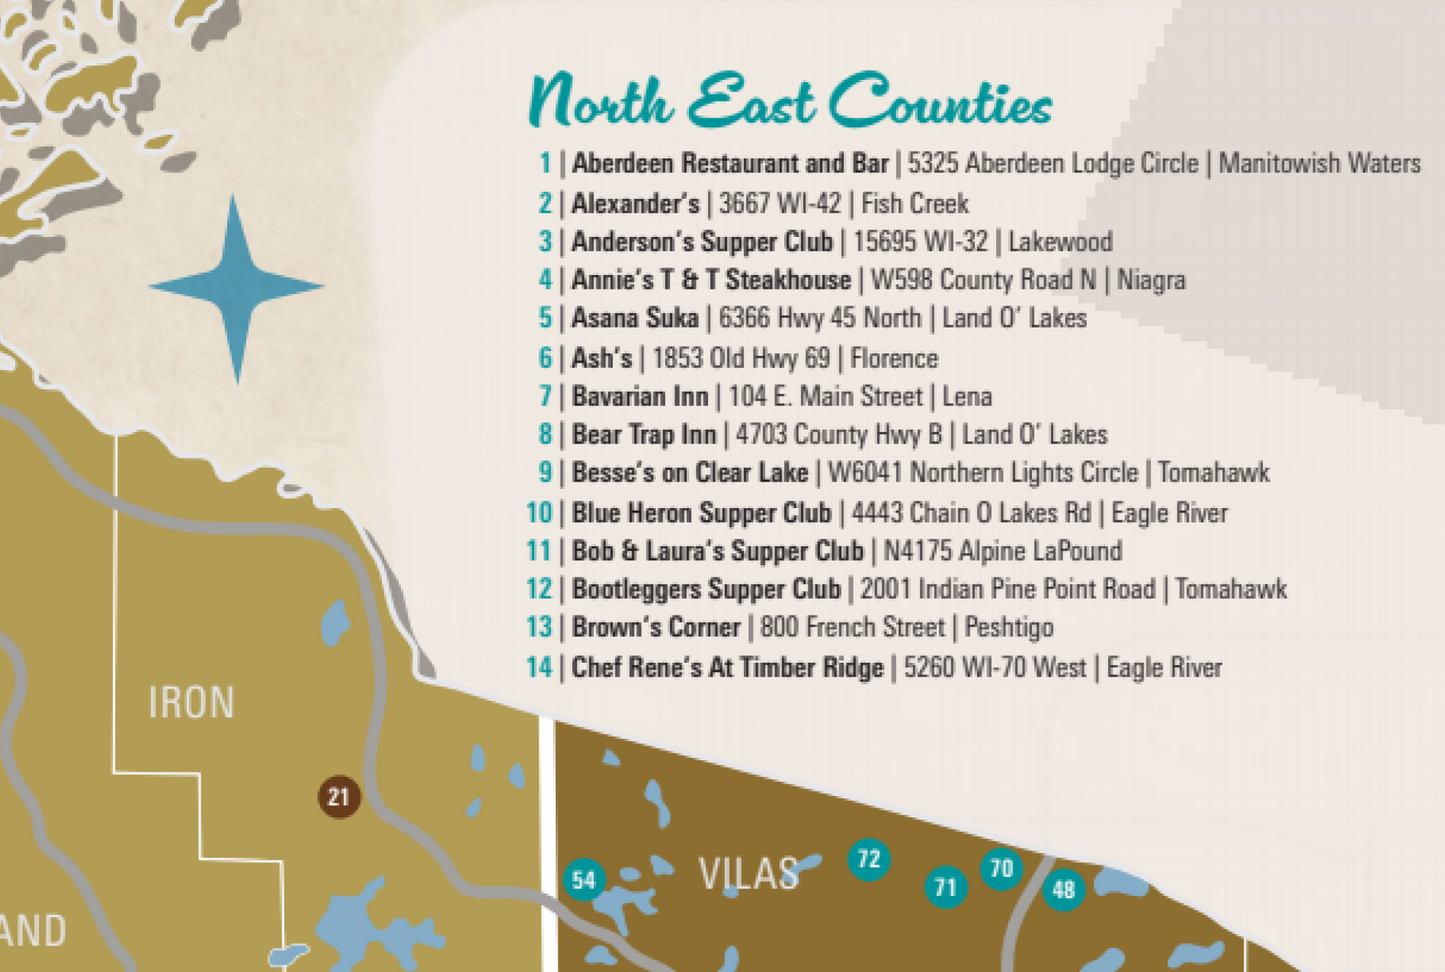 Example of a regional listing for the North East Counties